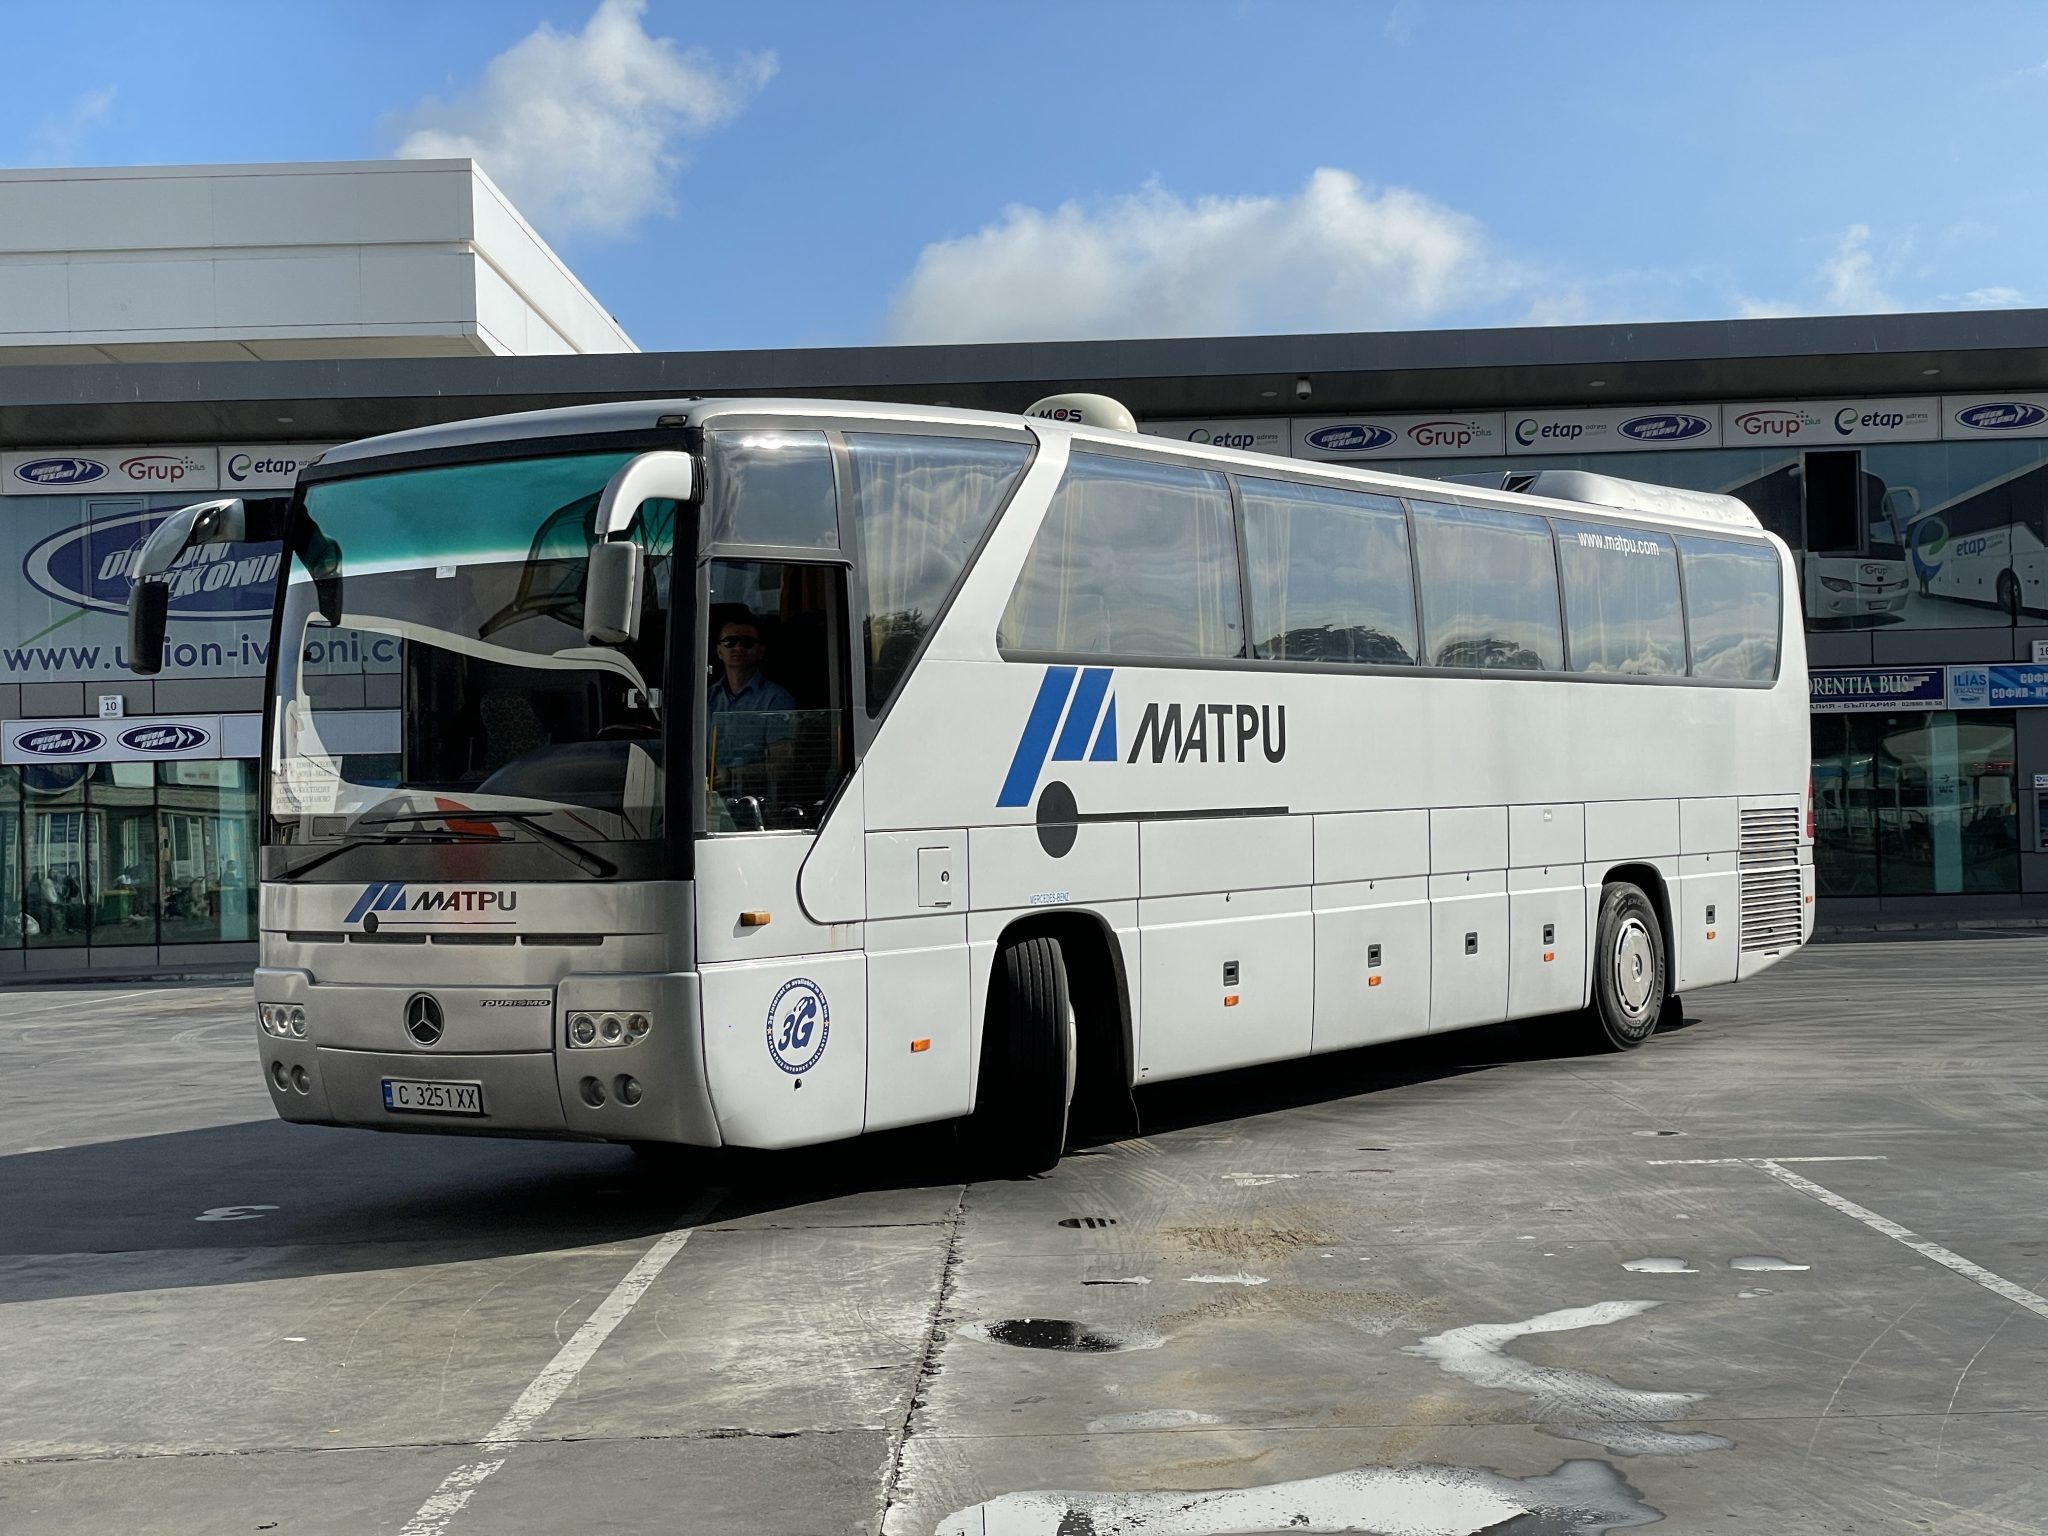 EVERYTHING YOU NEED TO KNOW ABOUT THE SOFIA TO SKOPJE BUS JOURNEY